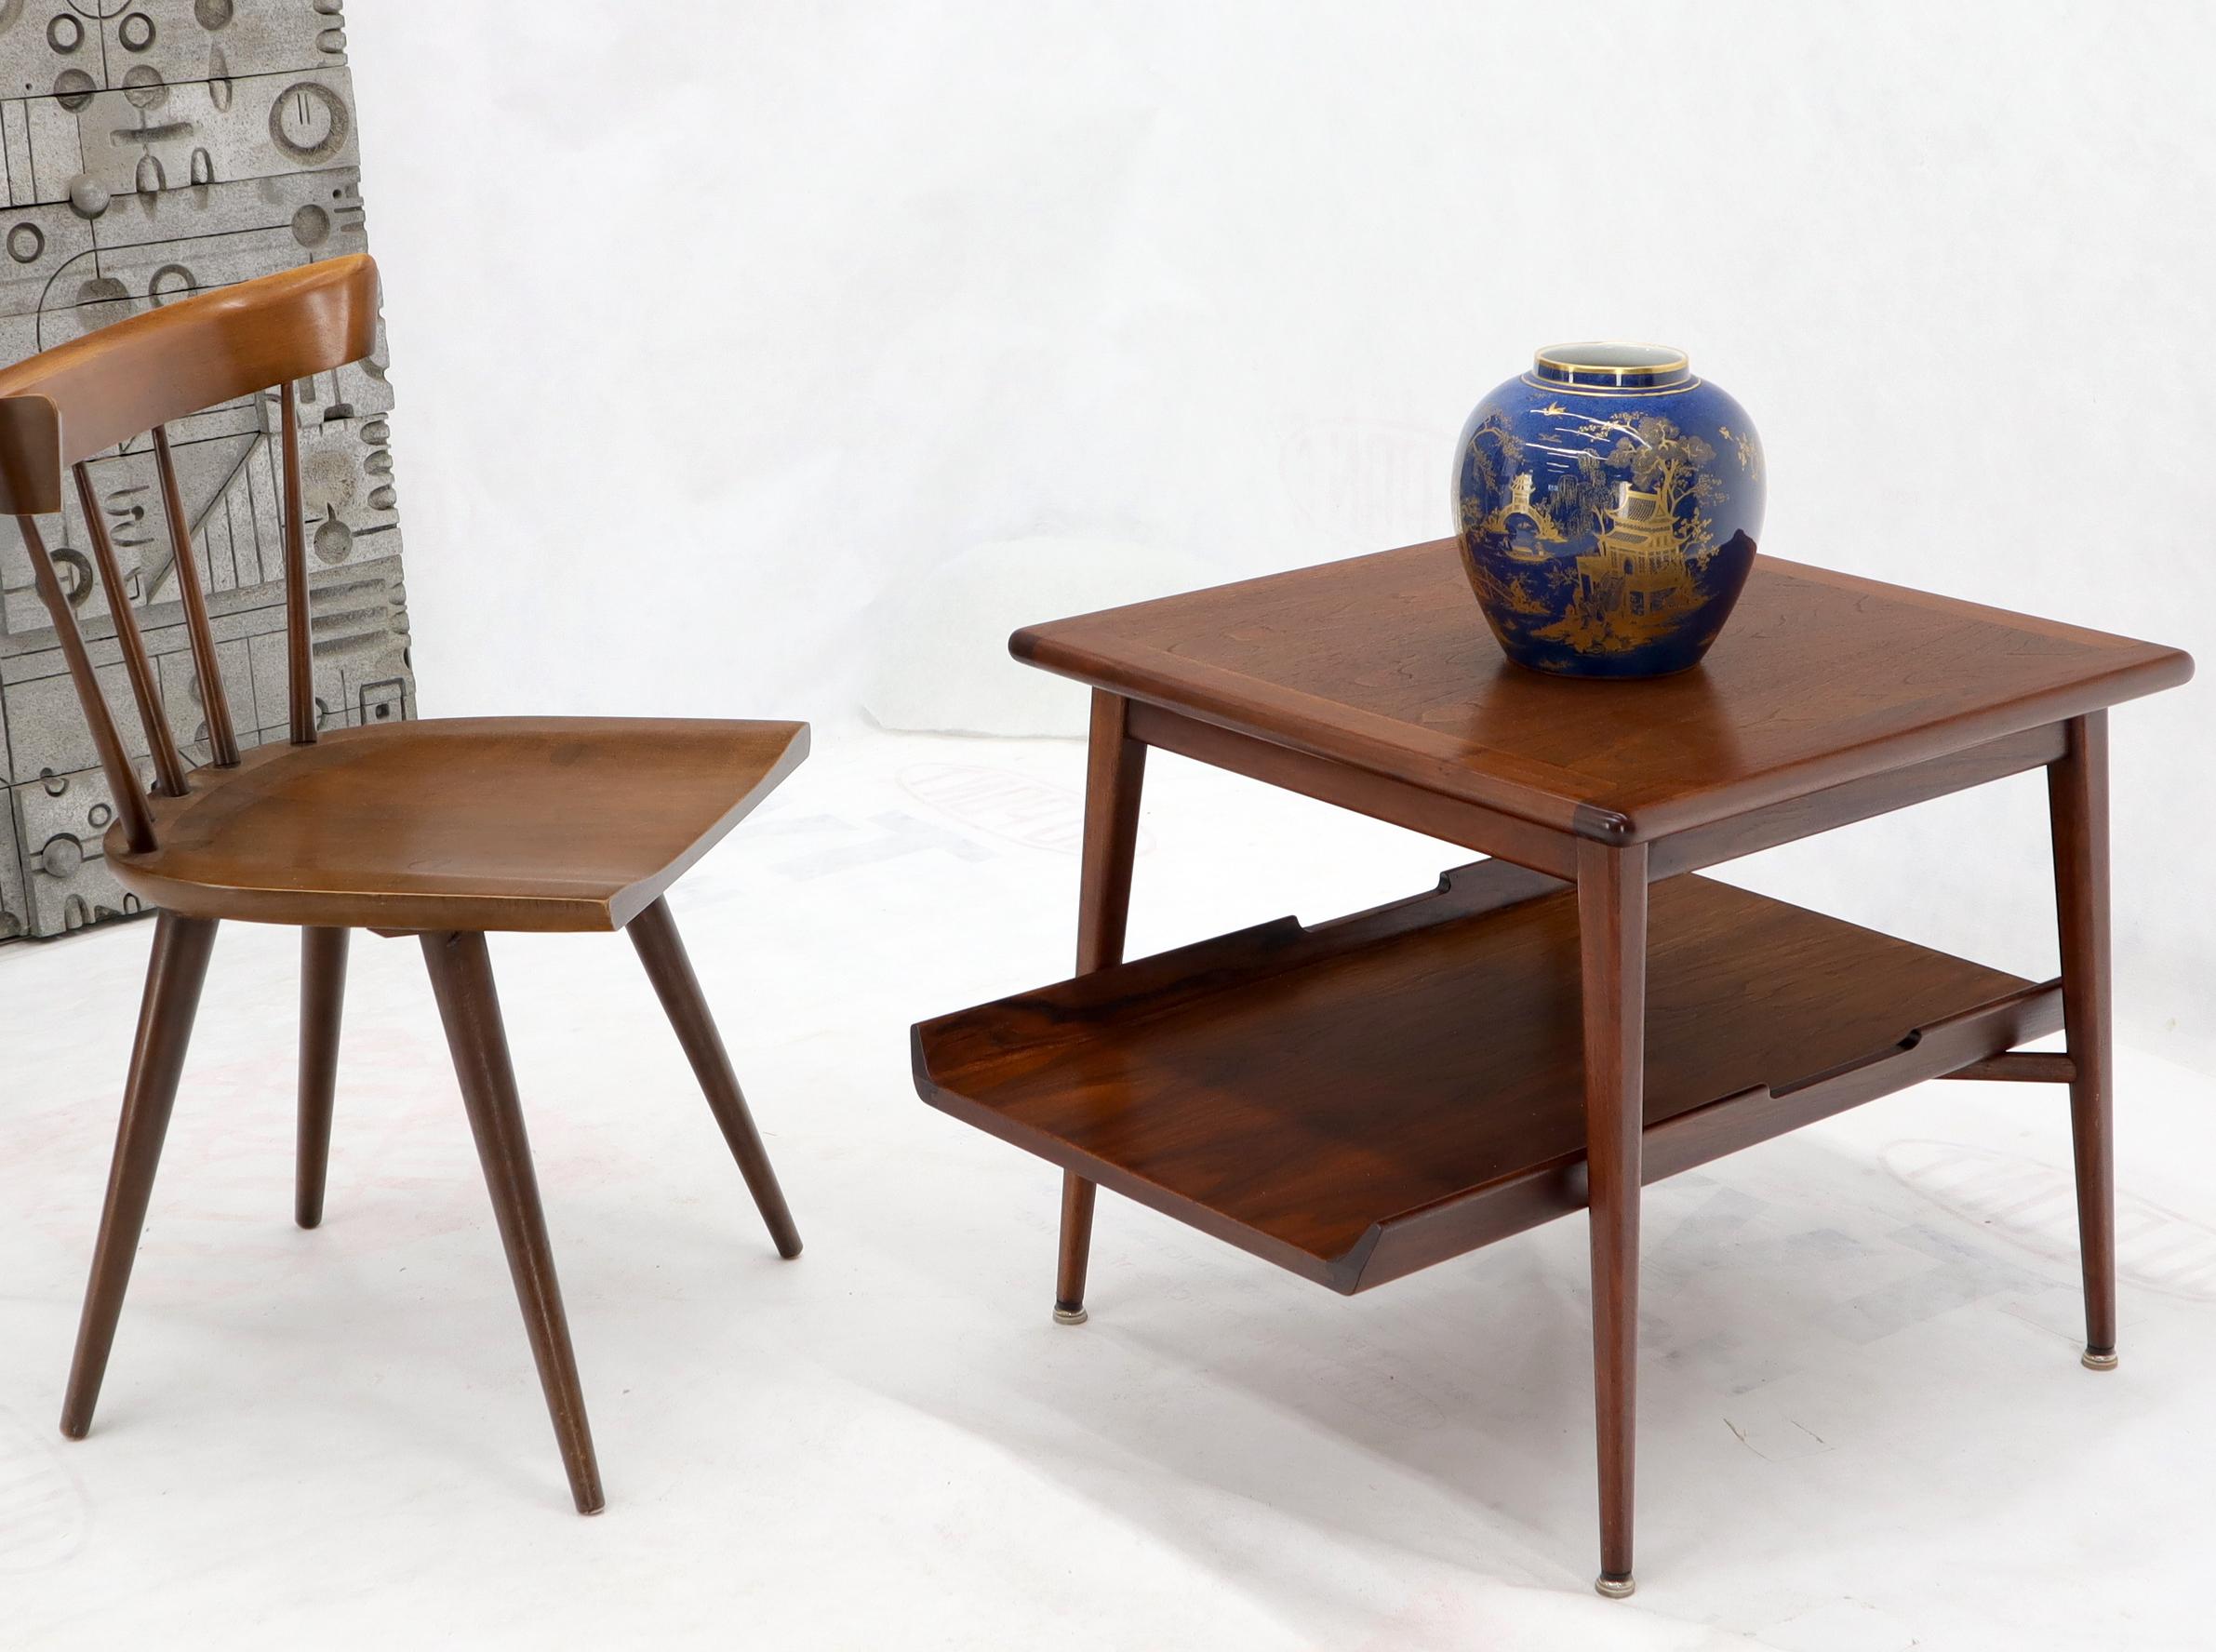 Pair of Mid-Century Modern two tier oiled walnut end side tables in stunning condition. Jens Risom Decor match.